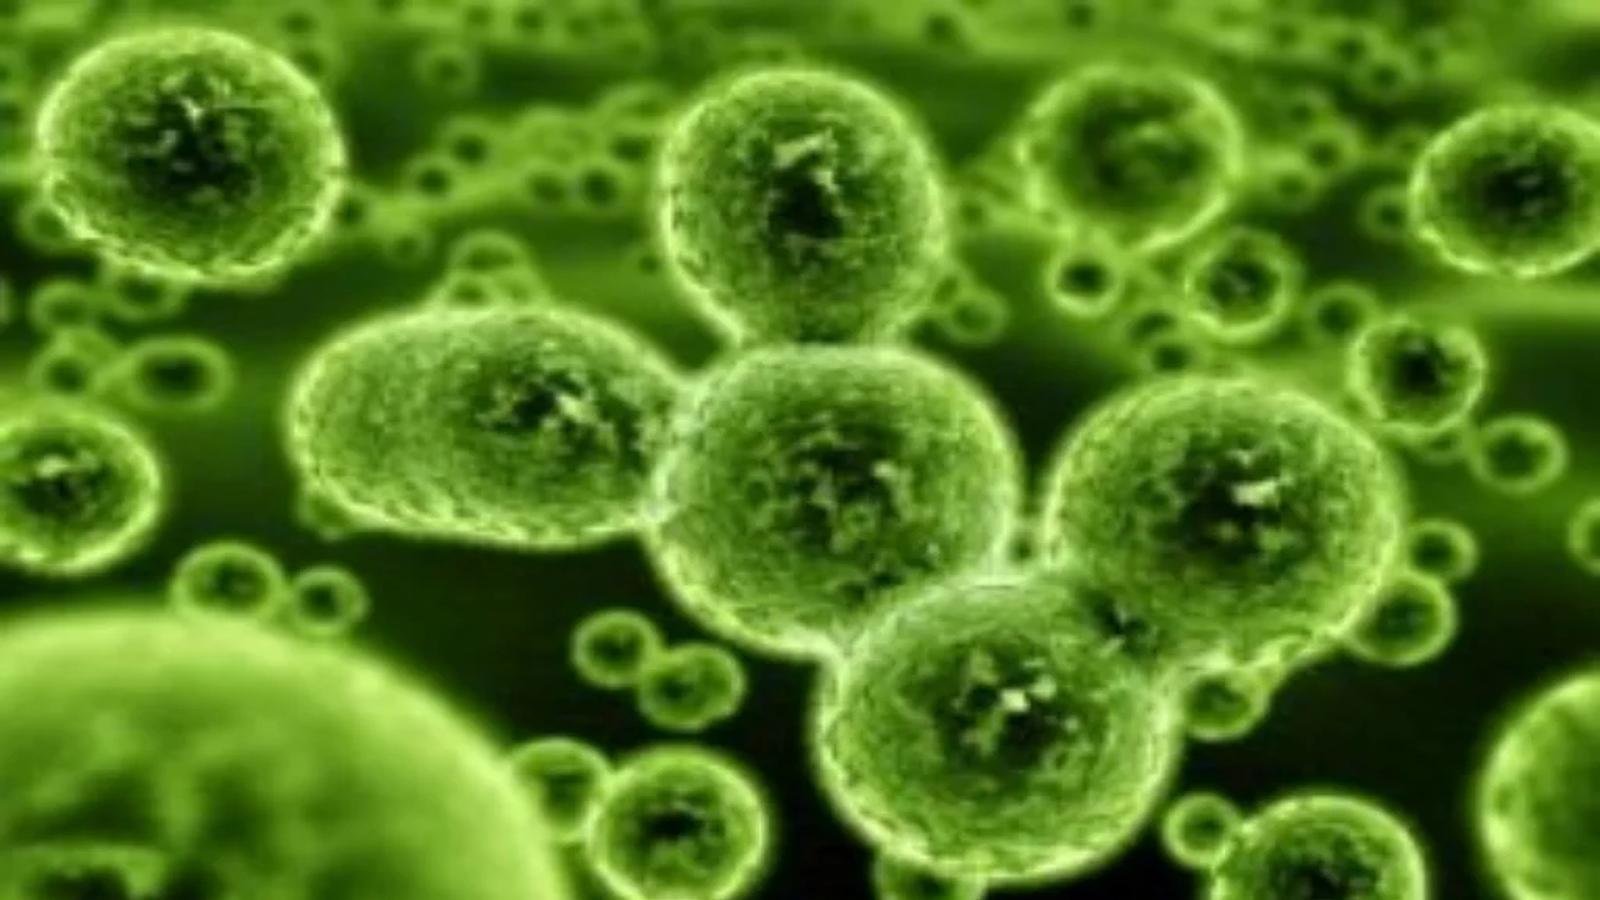 Yummy Doctor Holistic Health Education - Blog - Scientists Confirm Bacteria is Essential to Proper Immunity